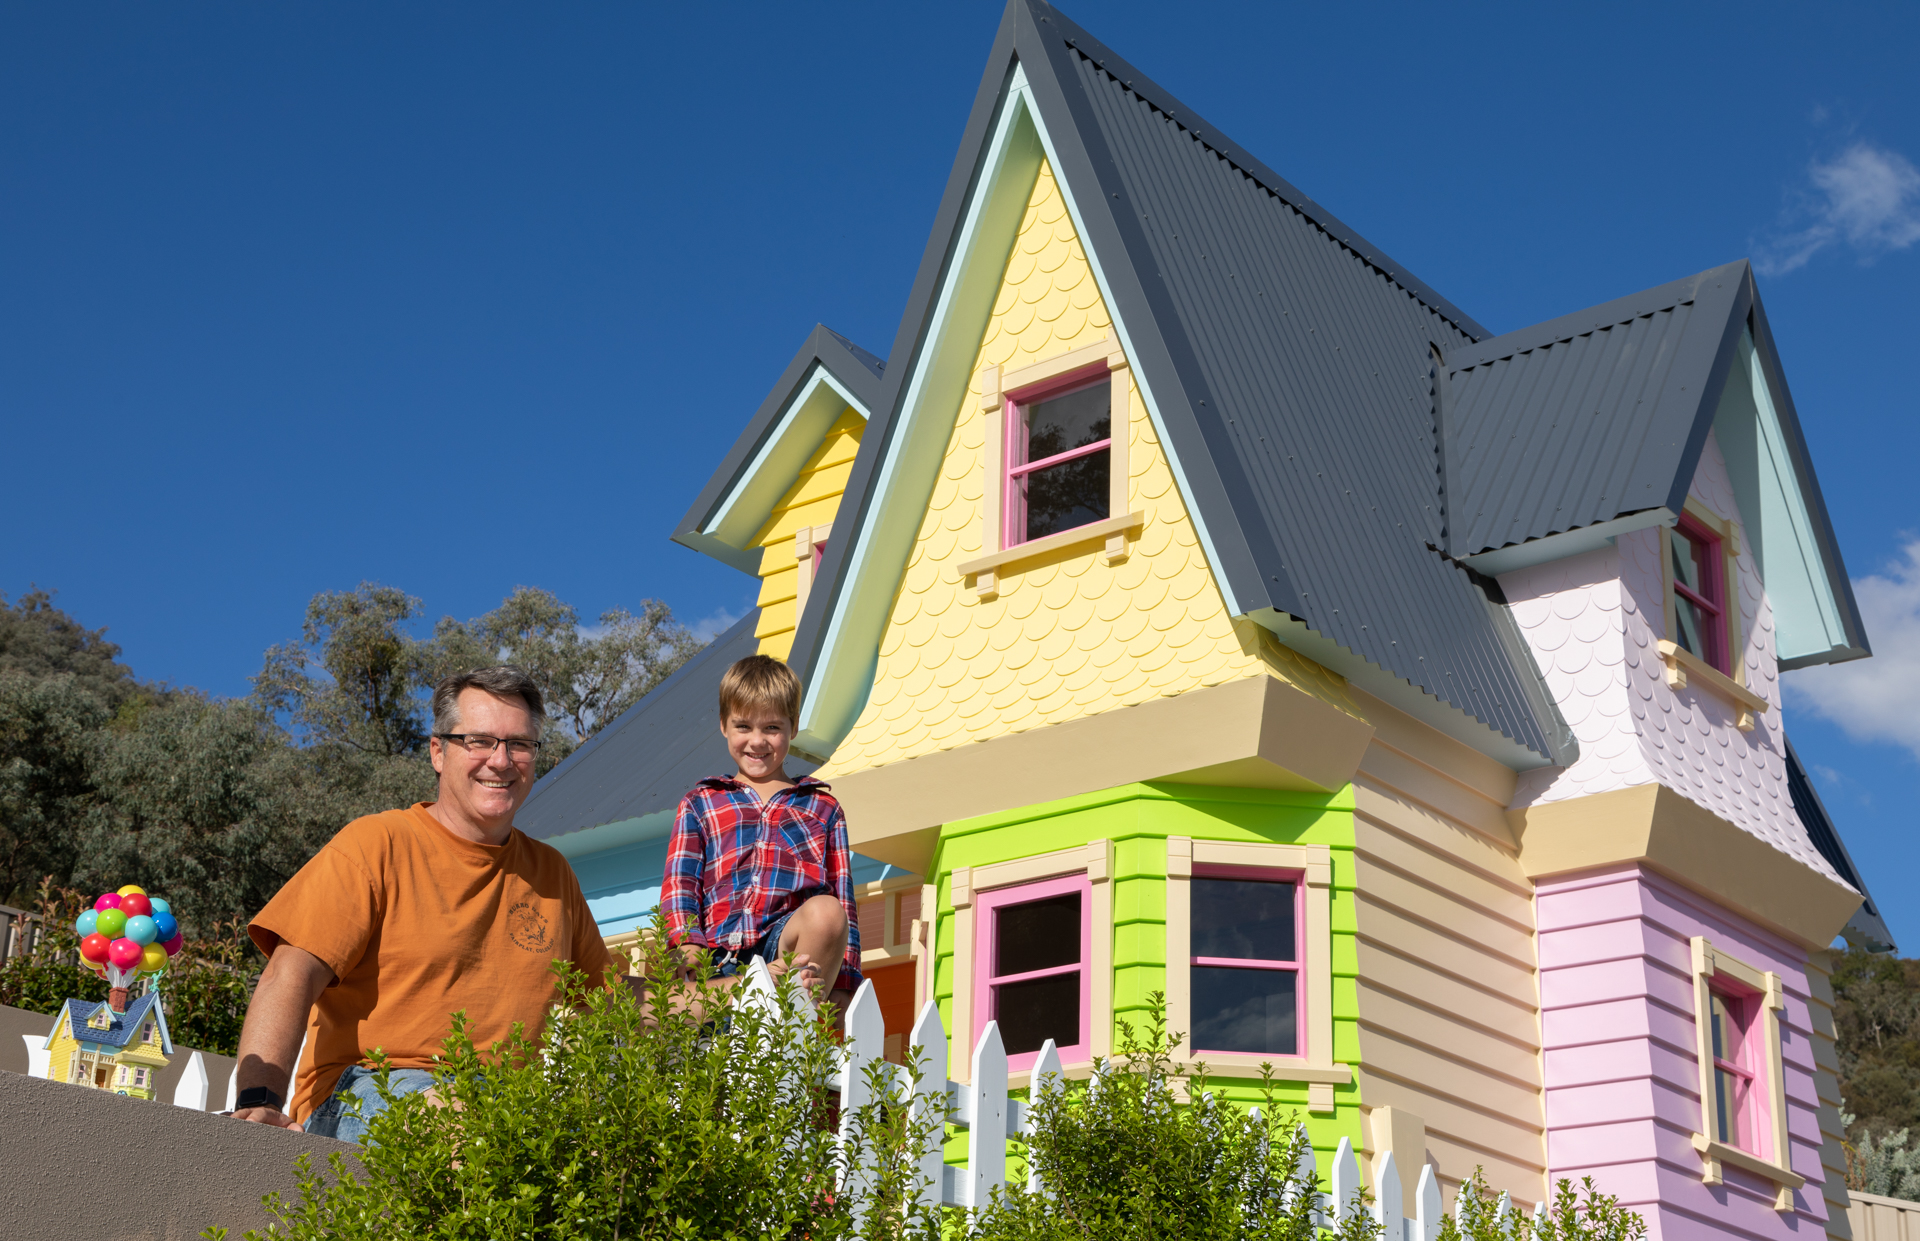 Up, up and away: How a Canberra dad became a sensation replicating Disney's Up house